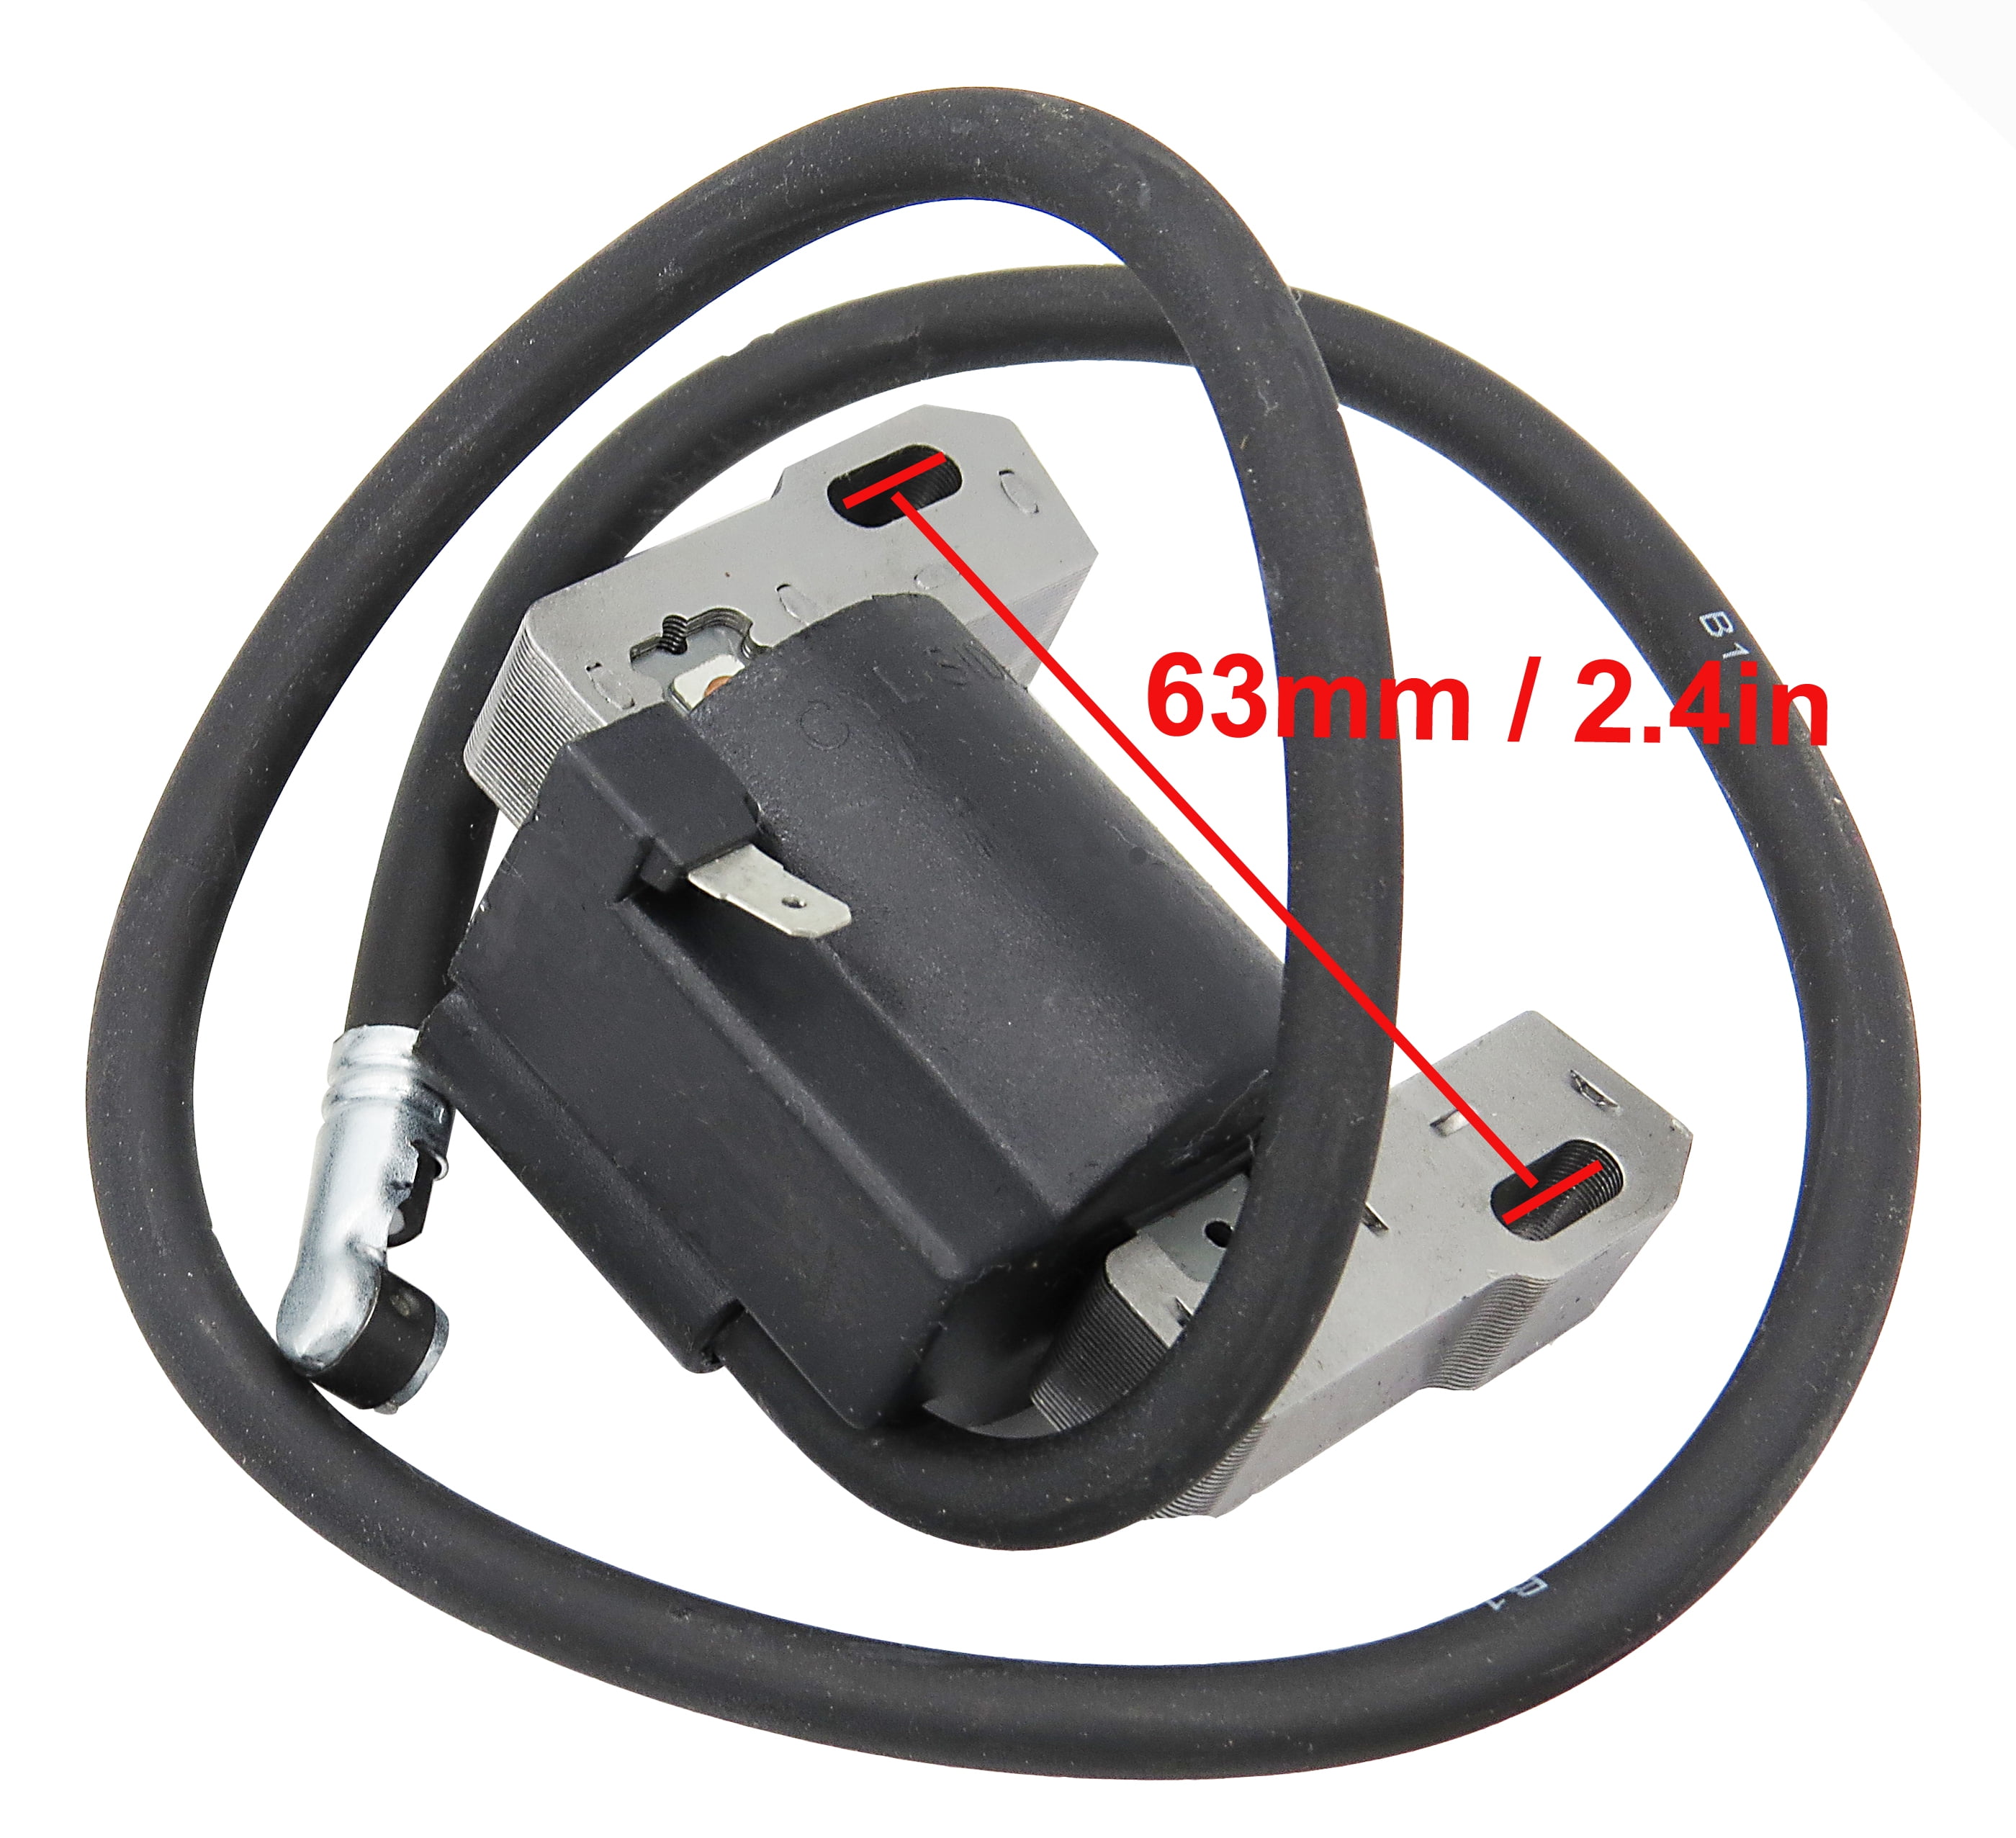 Details about   Ignition Coil for Toro 38573 38574 38640 38641 38642 38645 38650 38651 38652 